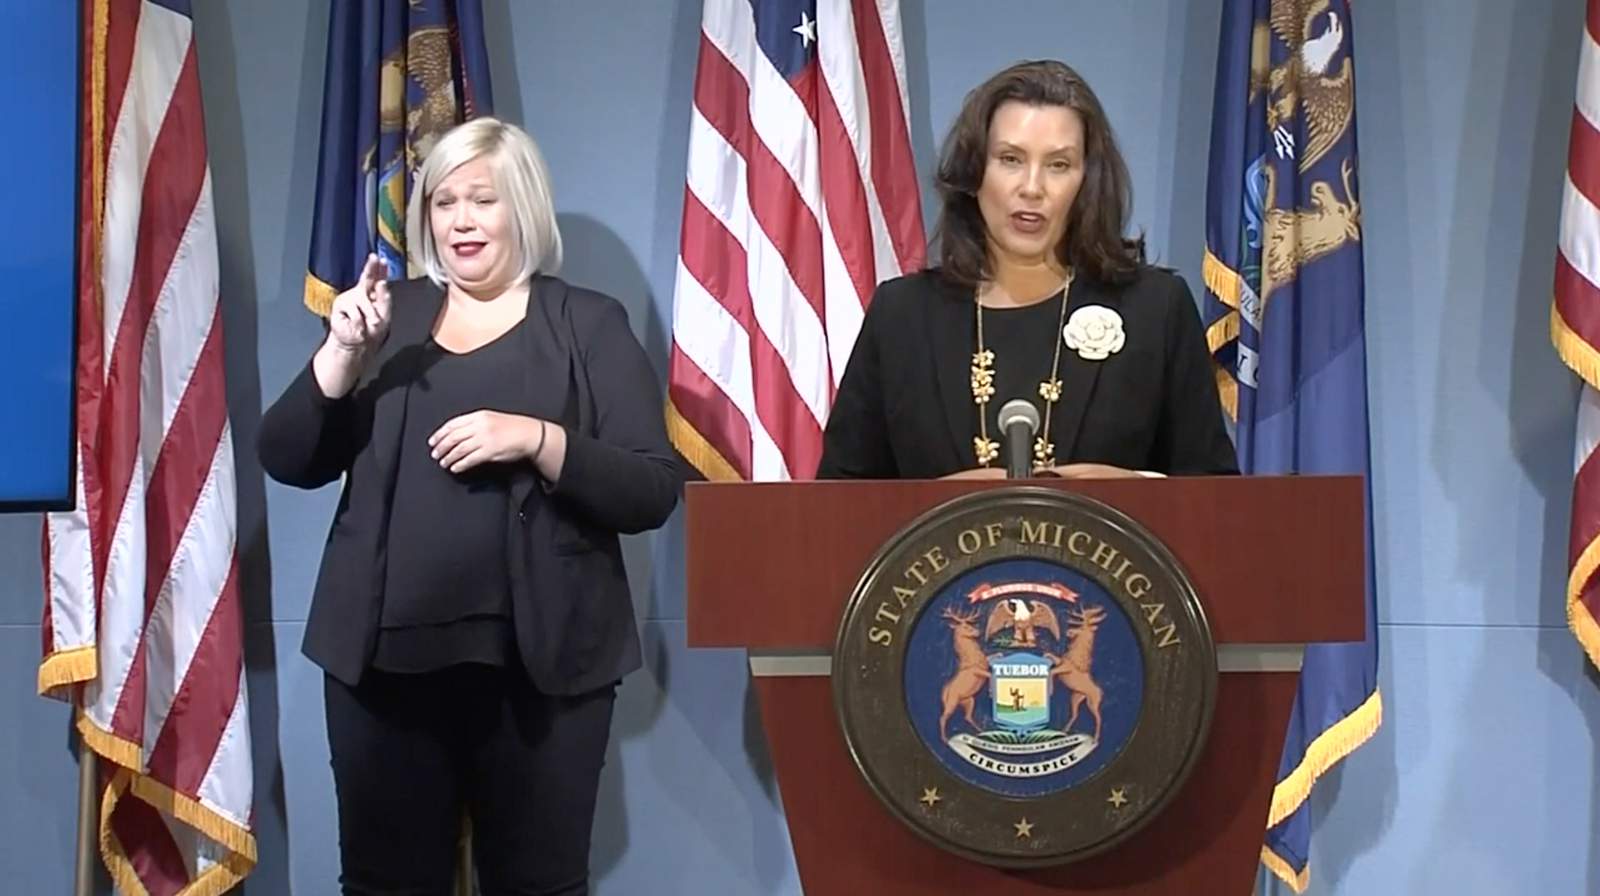 Michigan Gov. Whitmer not going to be bullied into reopening businesses that are still closed